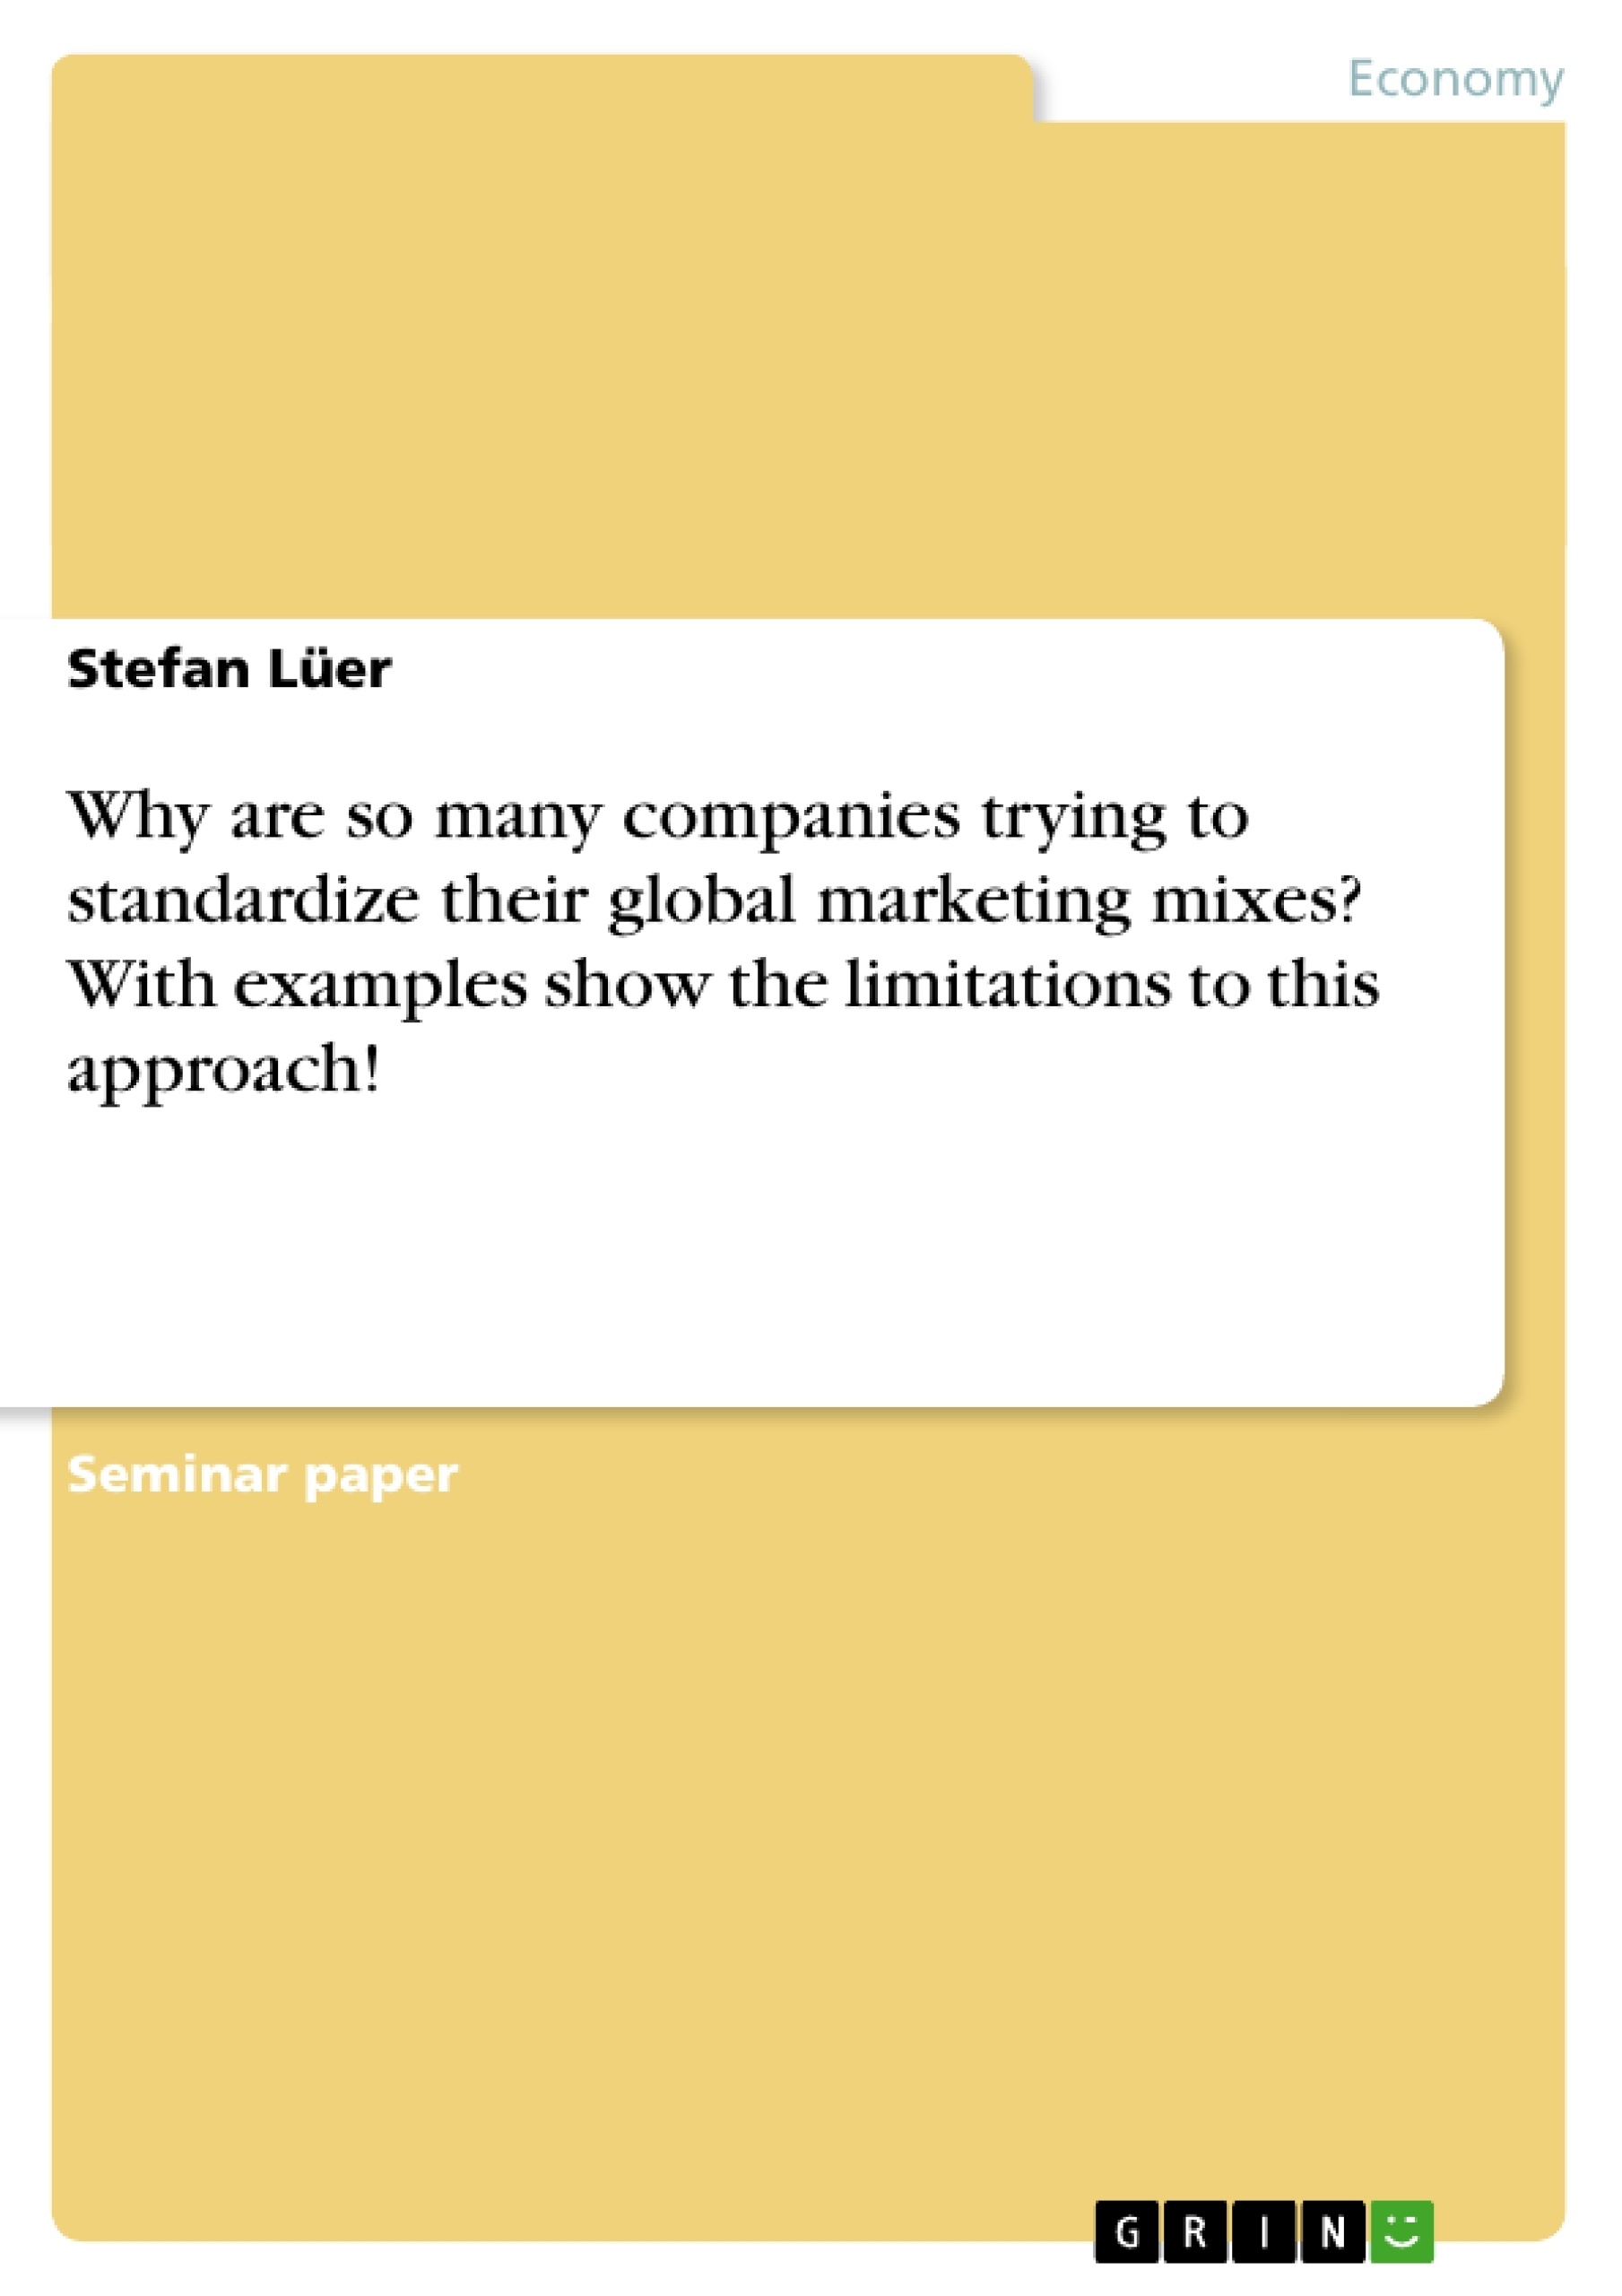 Title: Why are so many companies trying to standardize their global marketing mixes? With examples show the limitations to this approach!